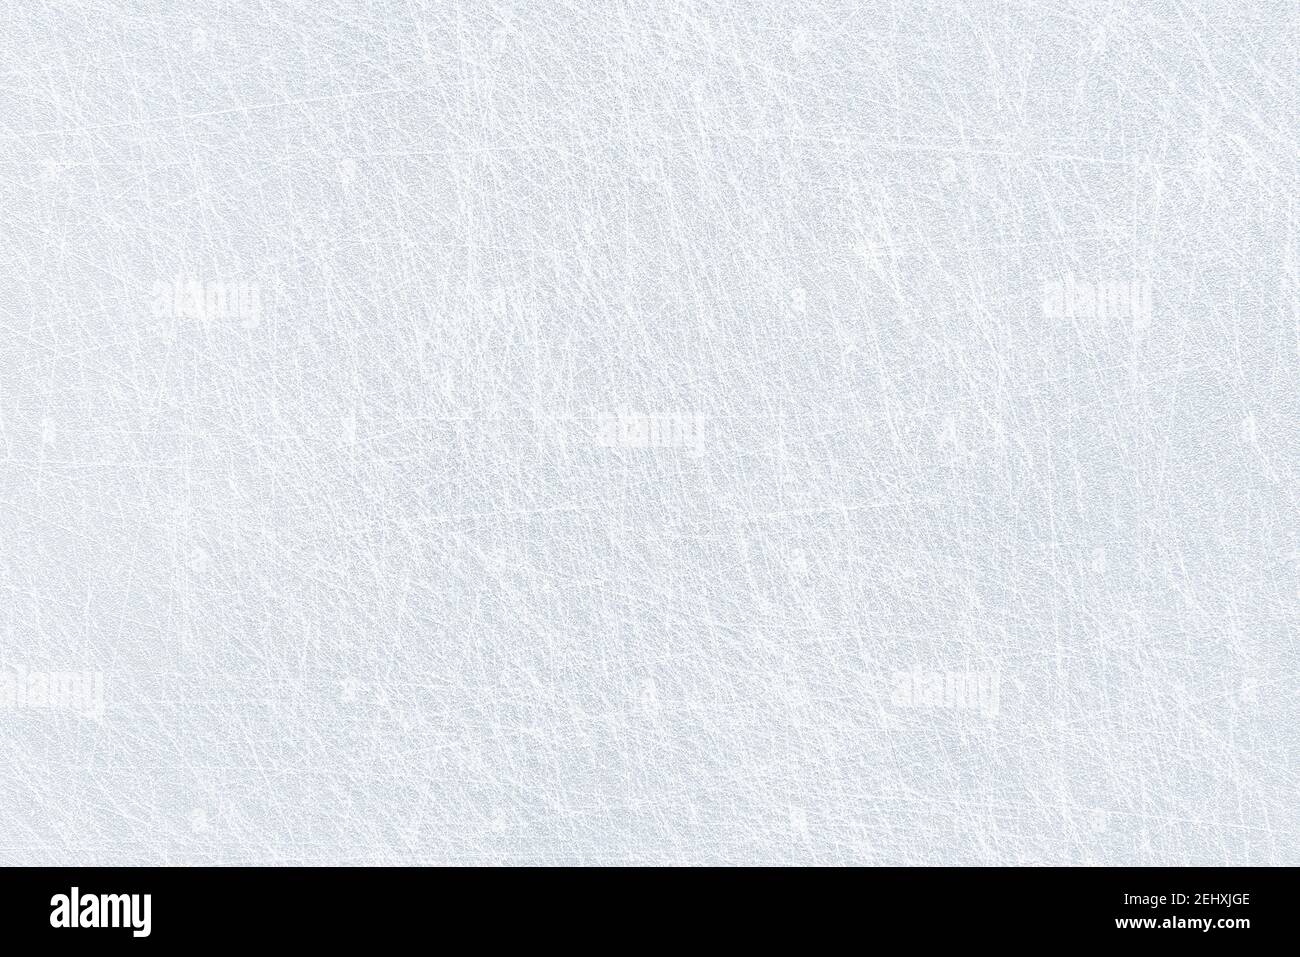 Ice background texture and snow surface with marks and lines from skating. Ice hockey rink, arena or stadium from top view. Light blue frost wallpaper. Stock Photo